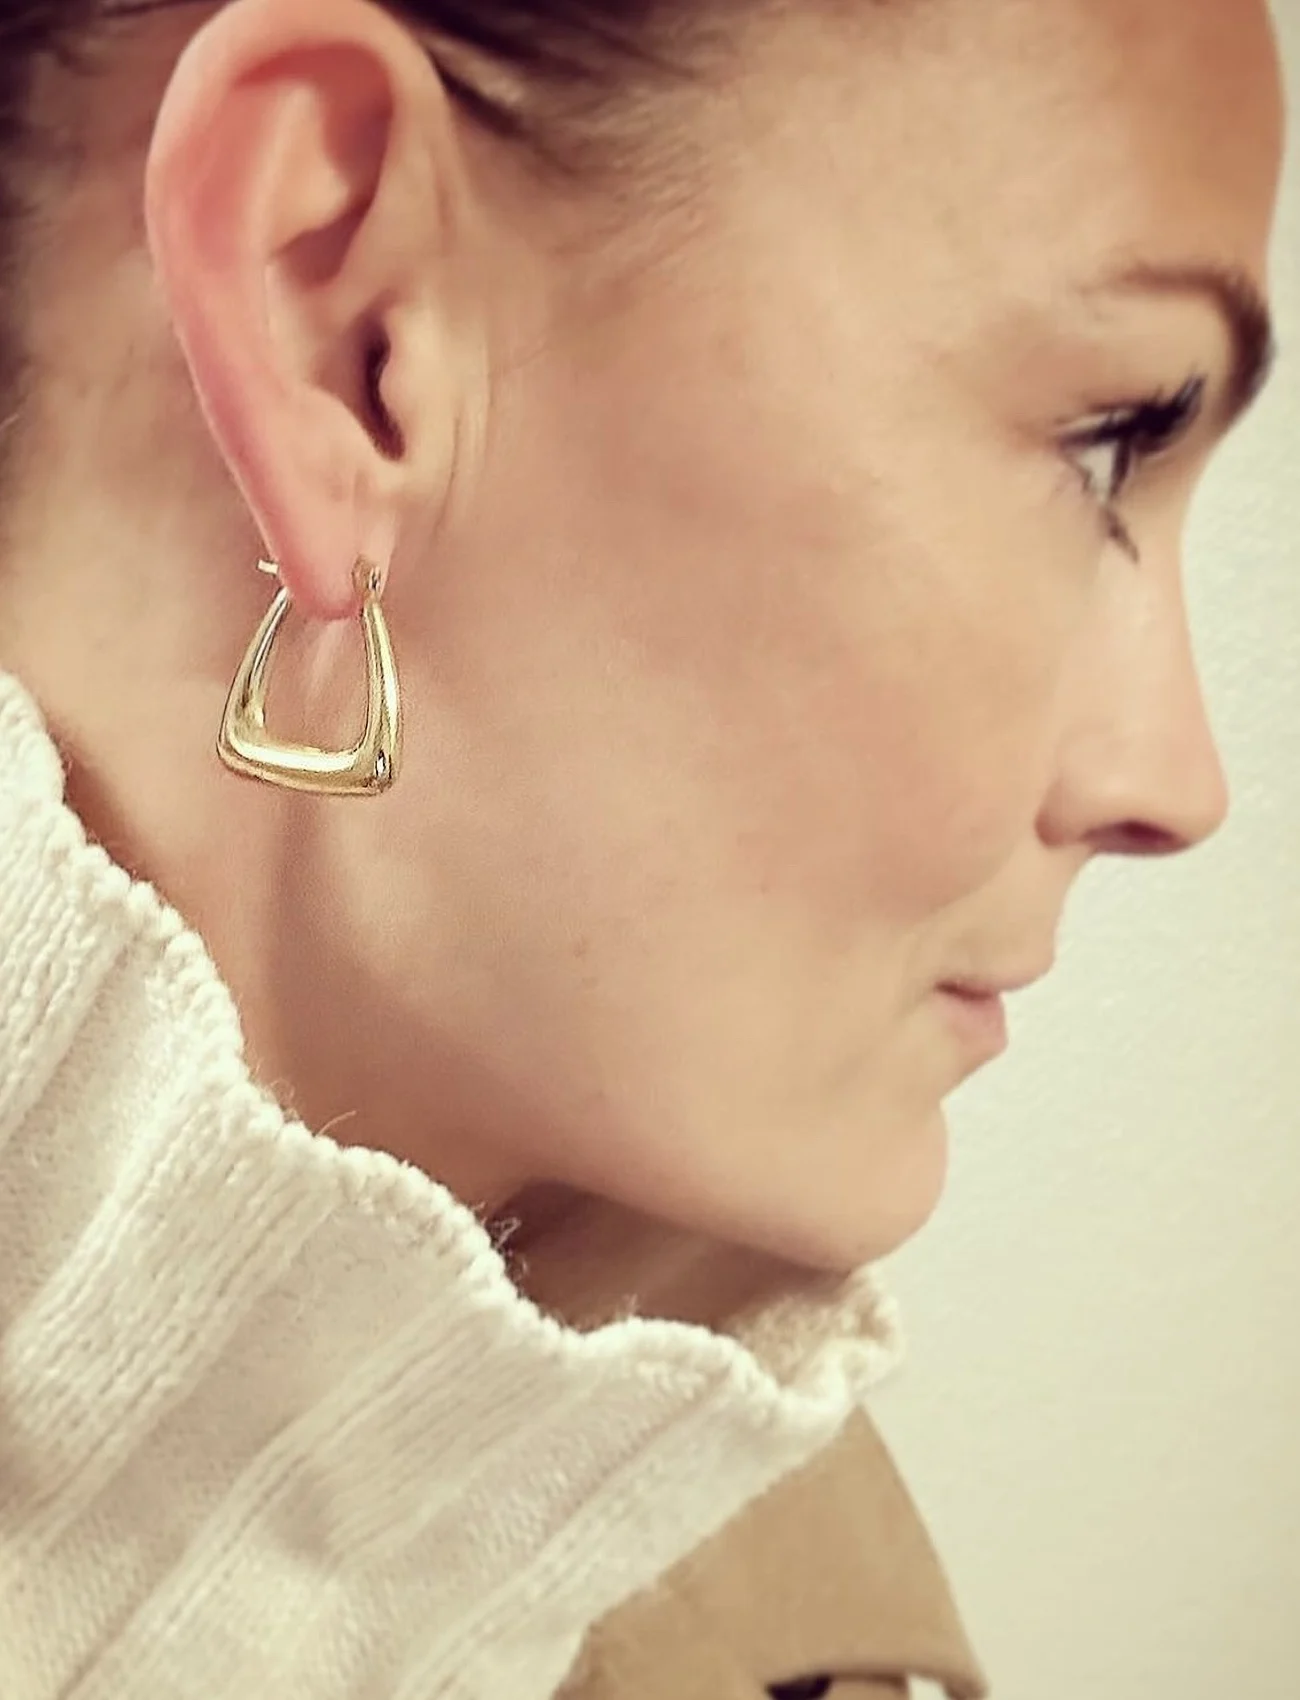 Bud to rose - Bowie Earring - hoops - gold - 1